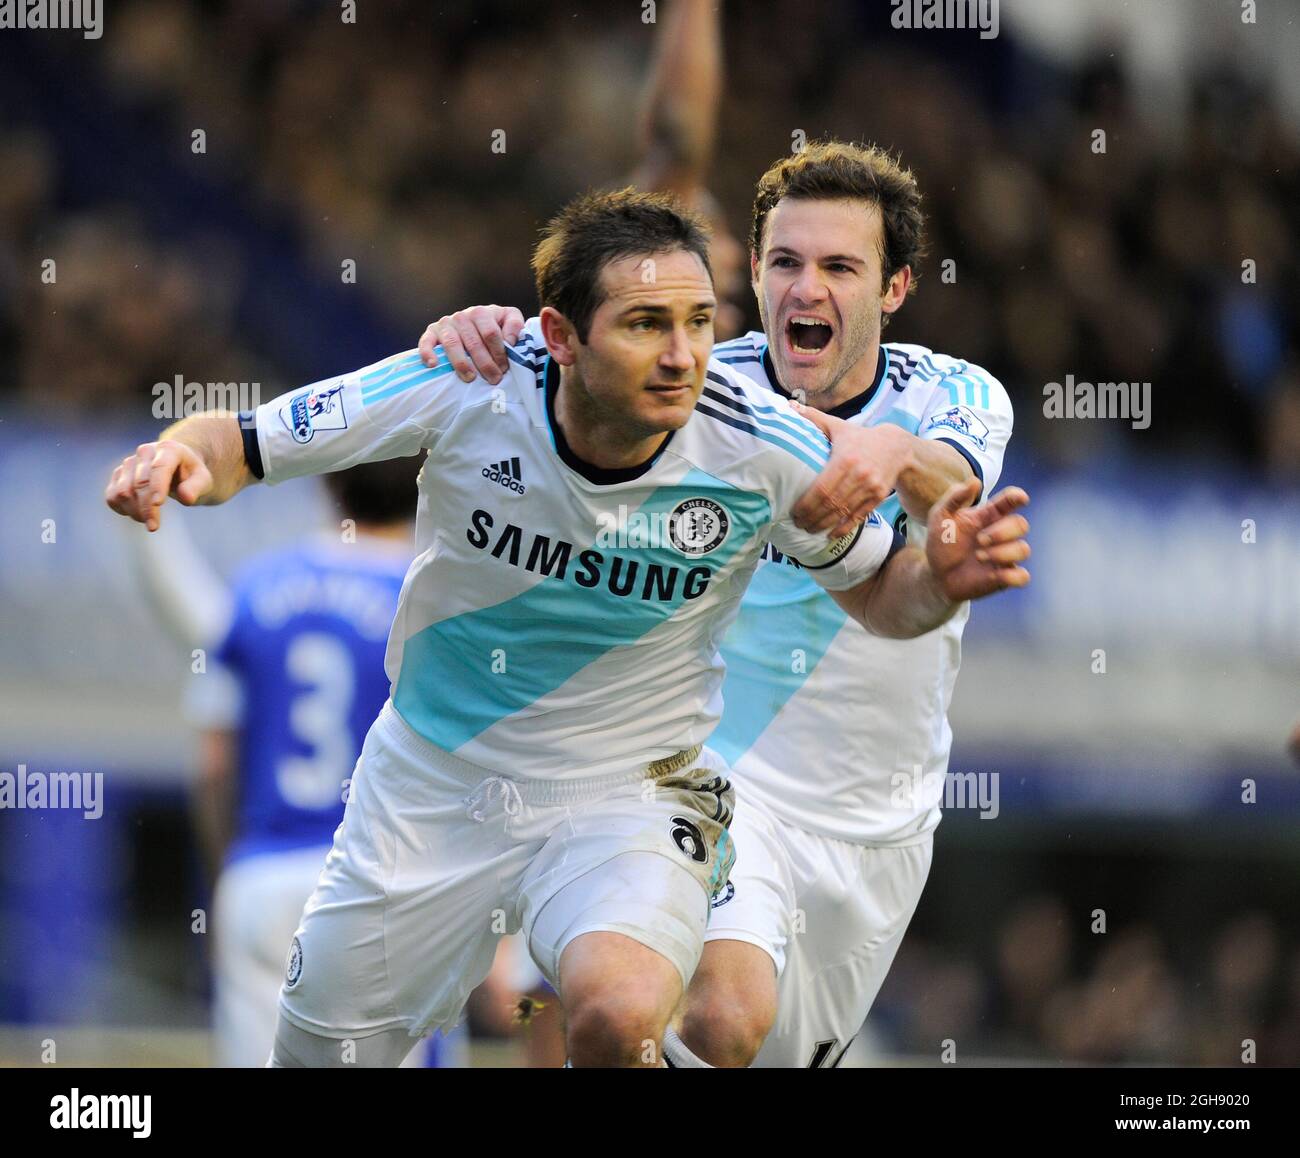 Frank Lampard of Chelsea celebrates his second goal with Juan Mata of Chelsea during Barclays Premier League soccer match between Everton and Chelsea at the Goodison Park Stadium in Liverpool, United Kingdom on 30th December, 2012. Picture Simon BellisSportimage Stock Photo